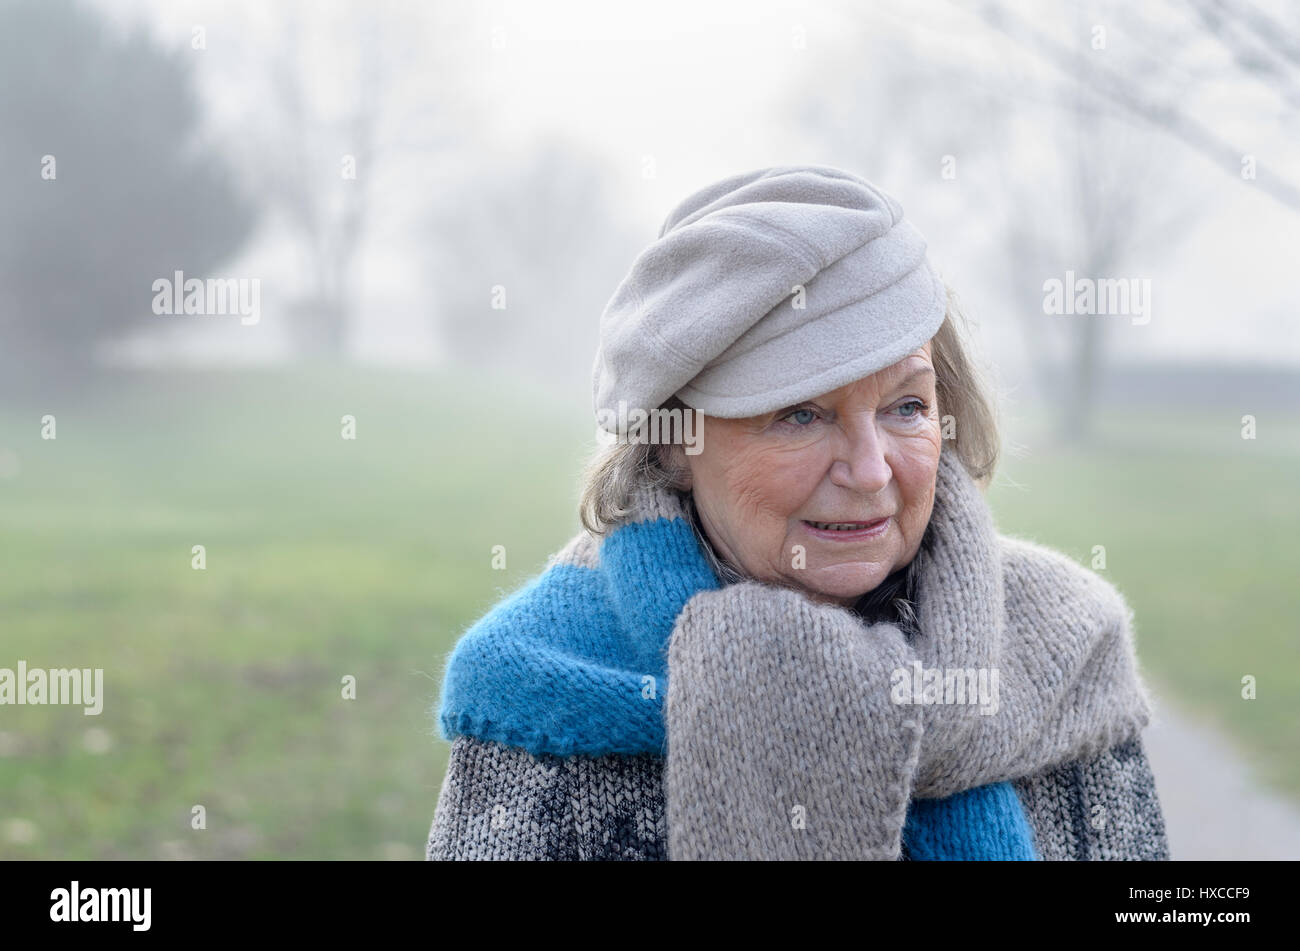 Stylish elderly woman wearing a grey scarf and beret walking on a rural road on a cold misty winter day, close up head and shoulders Stock Photo